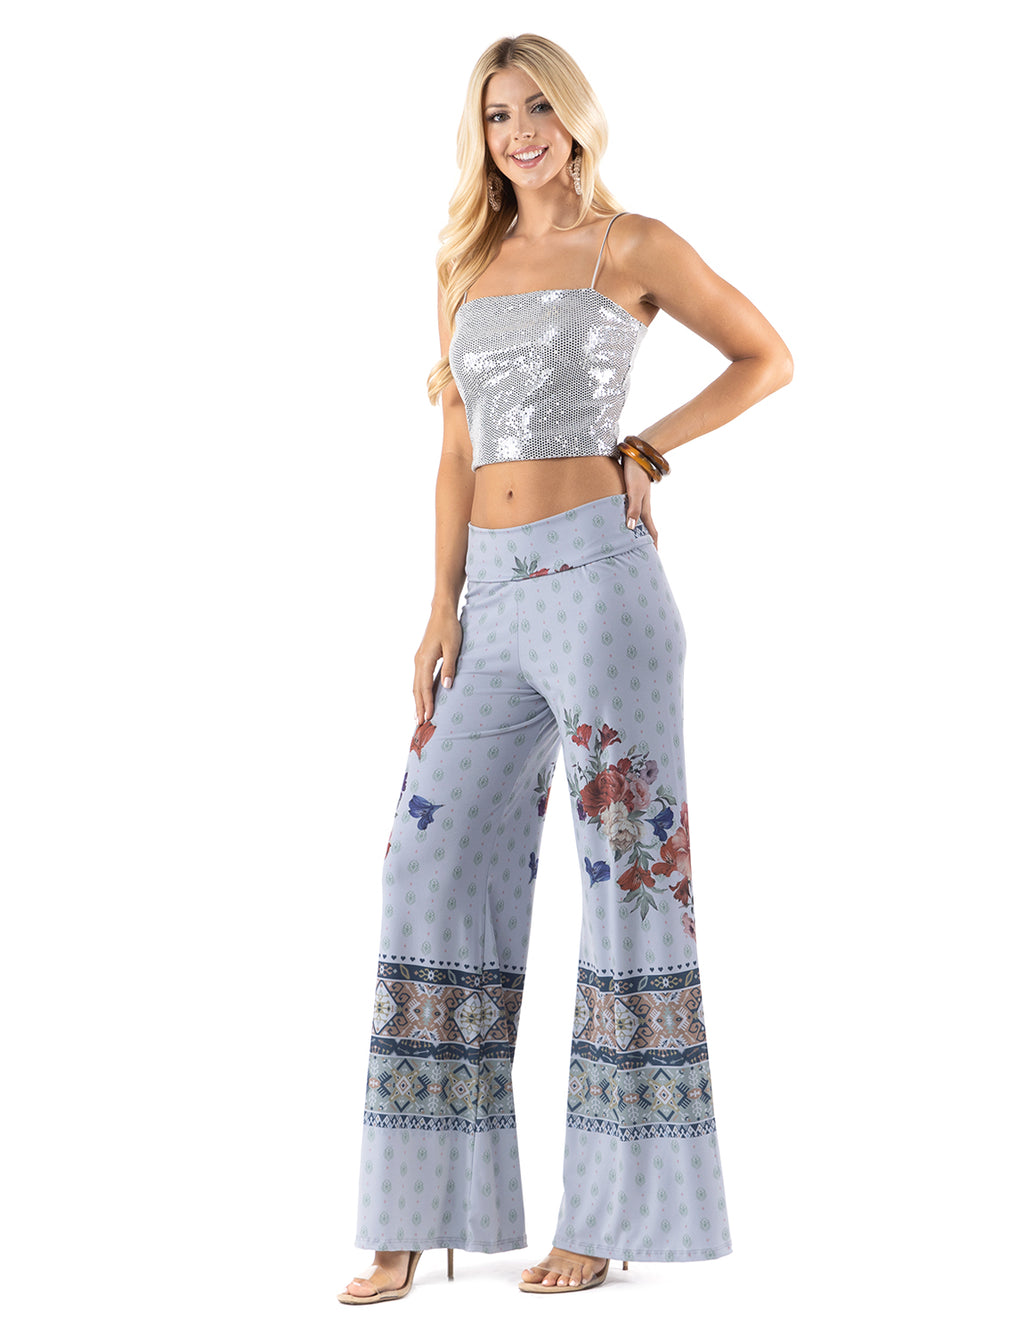 Blue Red Floral High waist palazzo pants featuring pockets, wide legs, and a comfortable stretchy fabric Perfect during spring, summer,Concerts, Festivals, Dance, Brunch